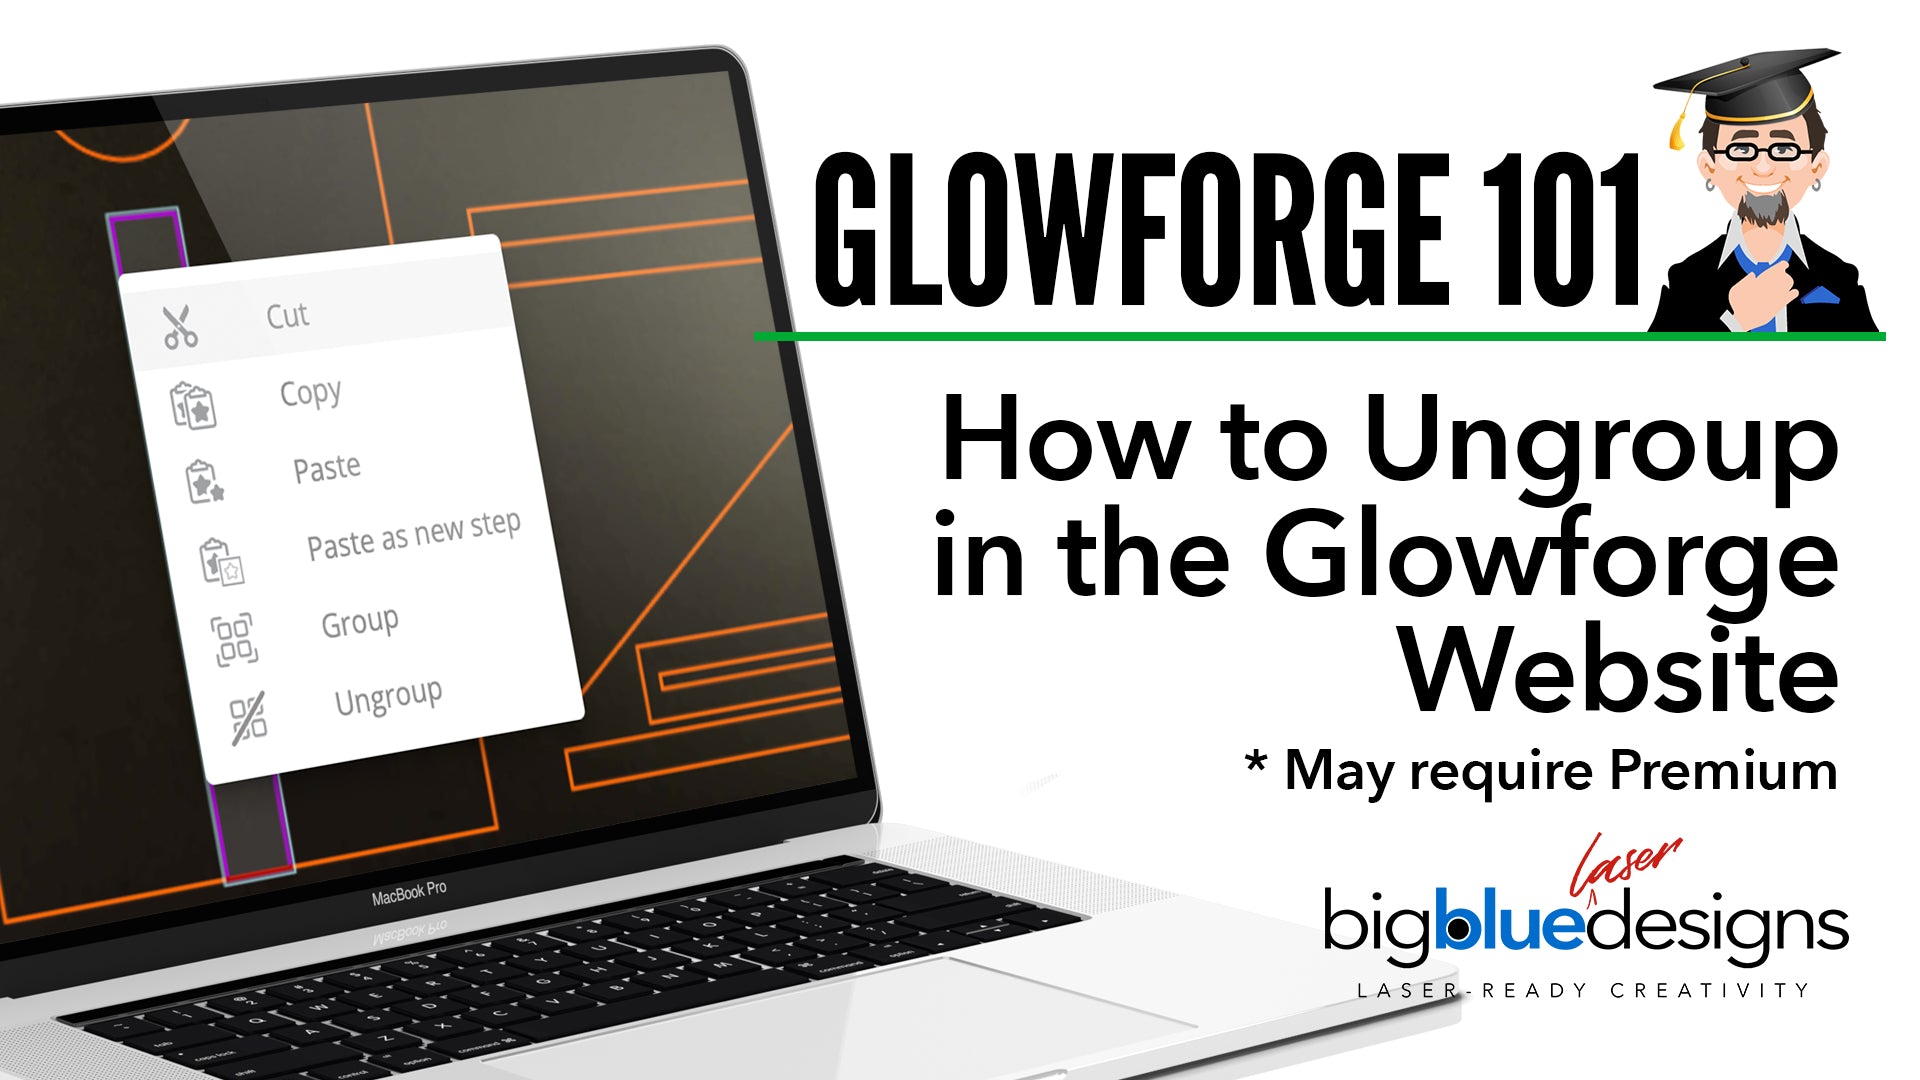 Glowforge 101: How to Ungroup Items Using the Built-In Ungroup Function